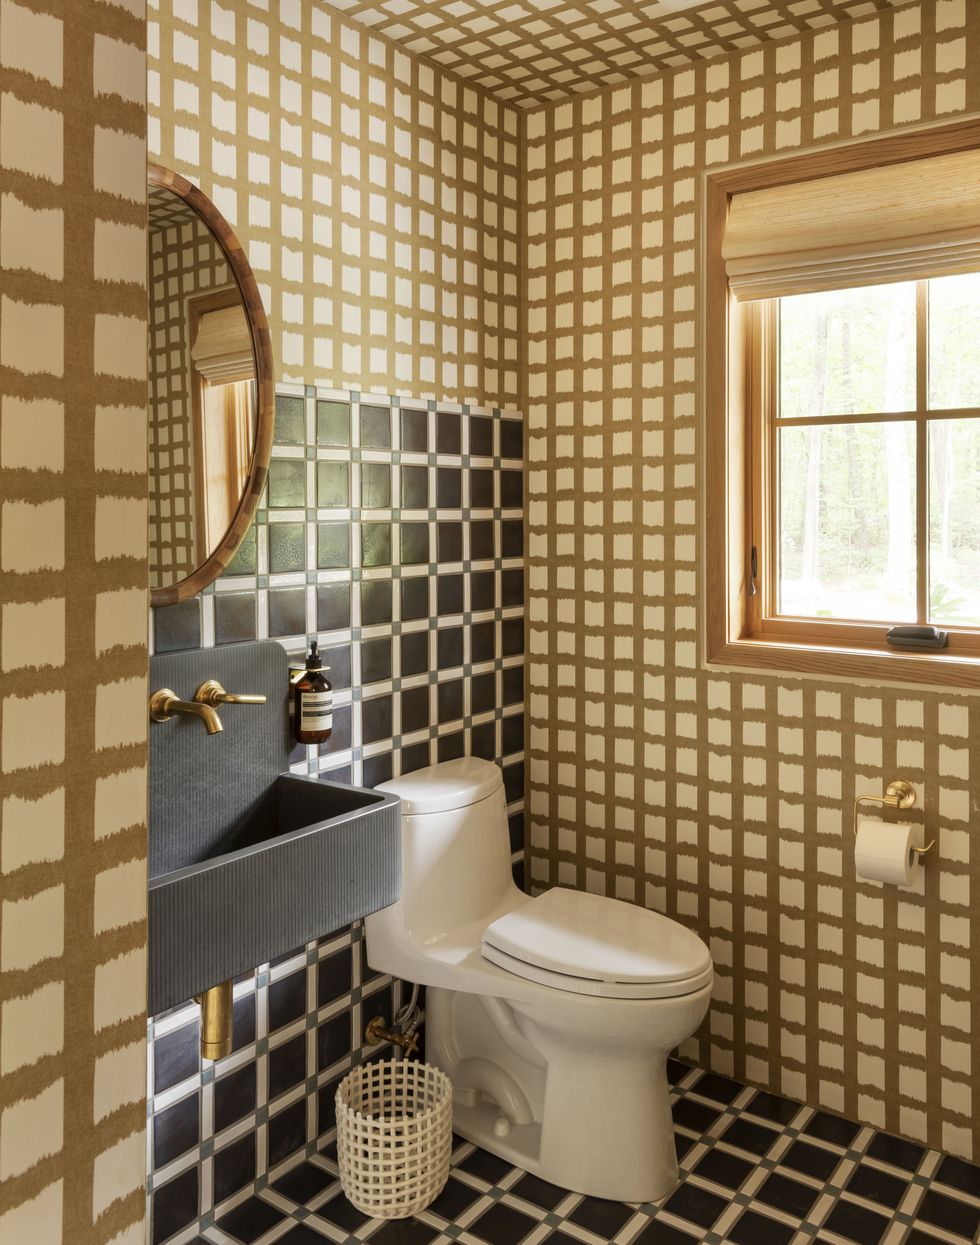 OXO Bathrooms: 8 Things To Make A Small Bathroom More Luxurious   Contemporary small bathrooms, Small bathroom, Very small bathroom